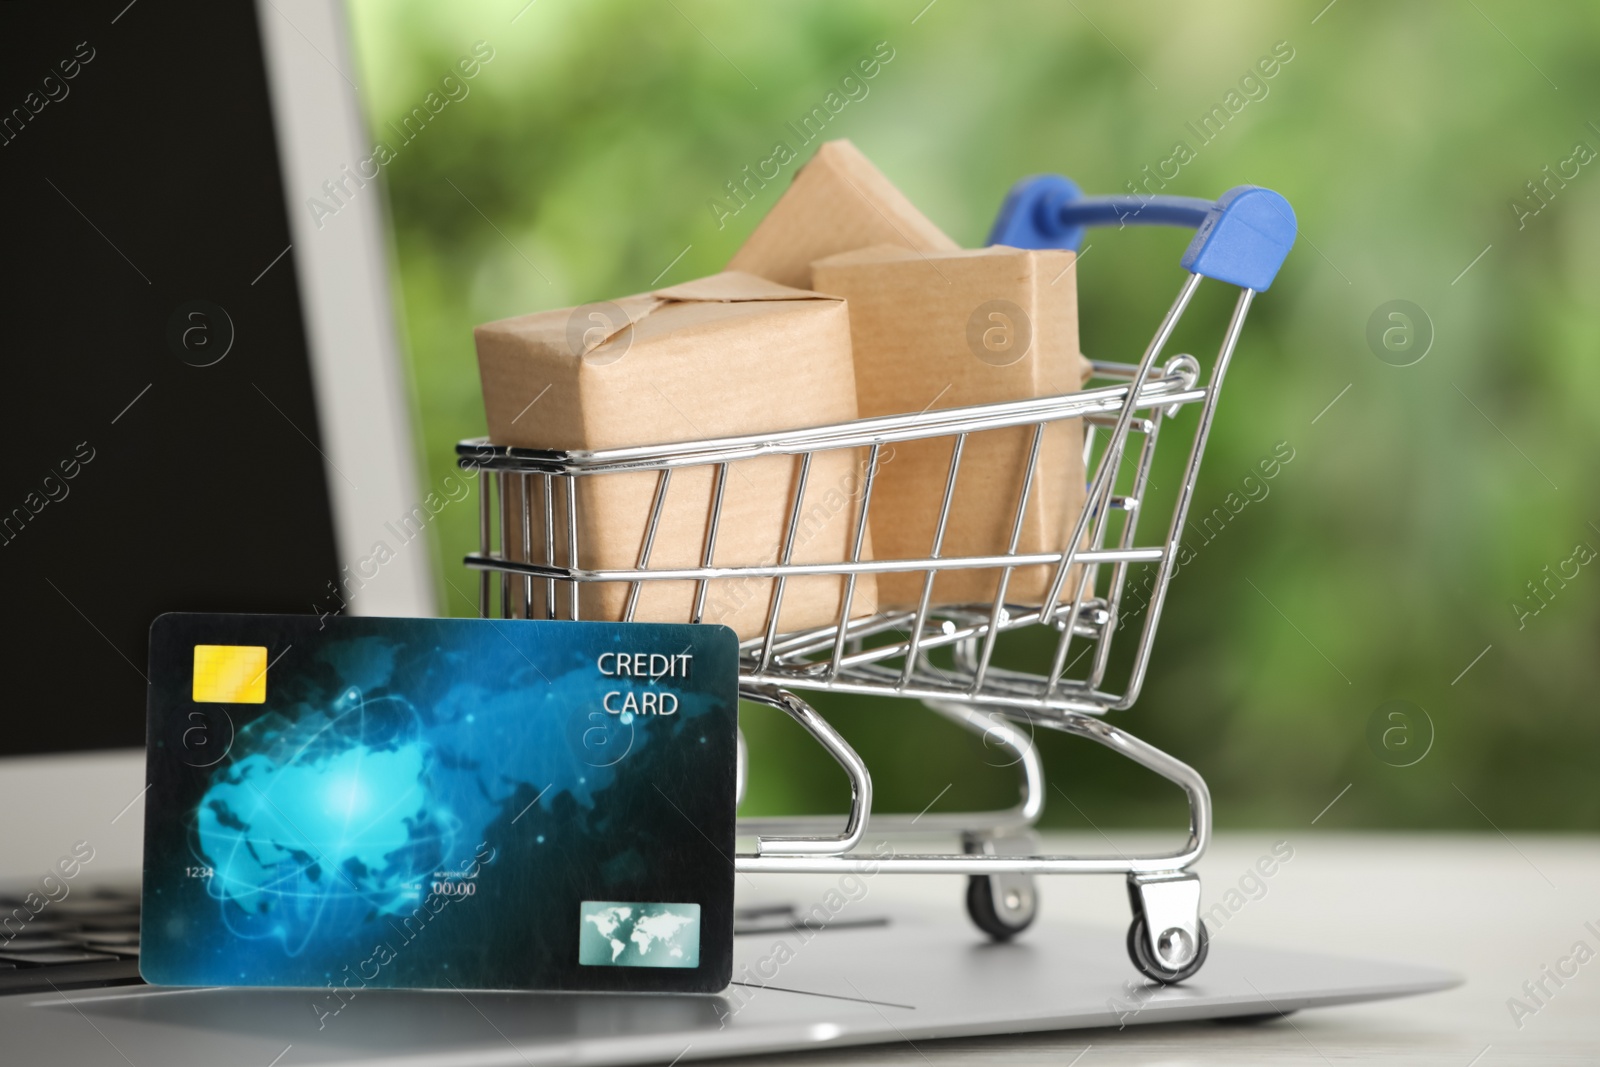 Photo of Online payment concept. Small shopping cart with bank card, boxes and laptop on table, closeup